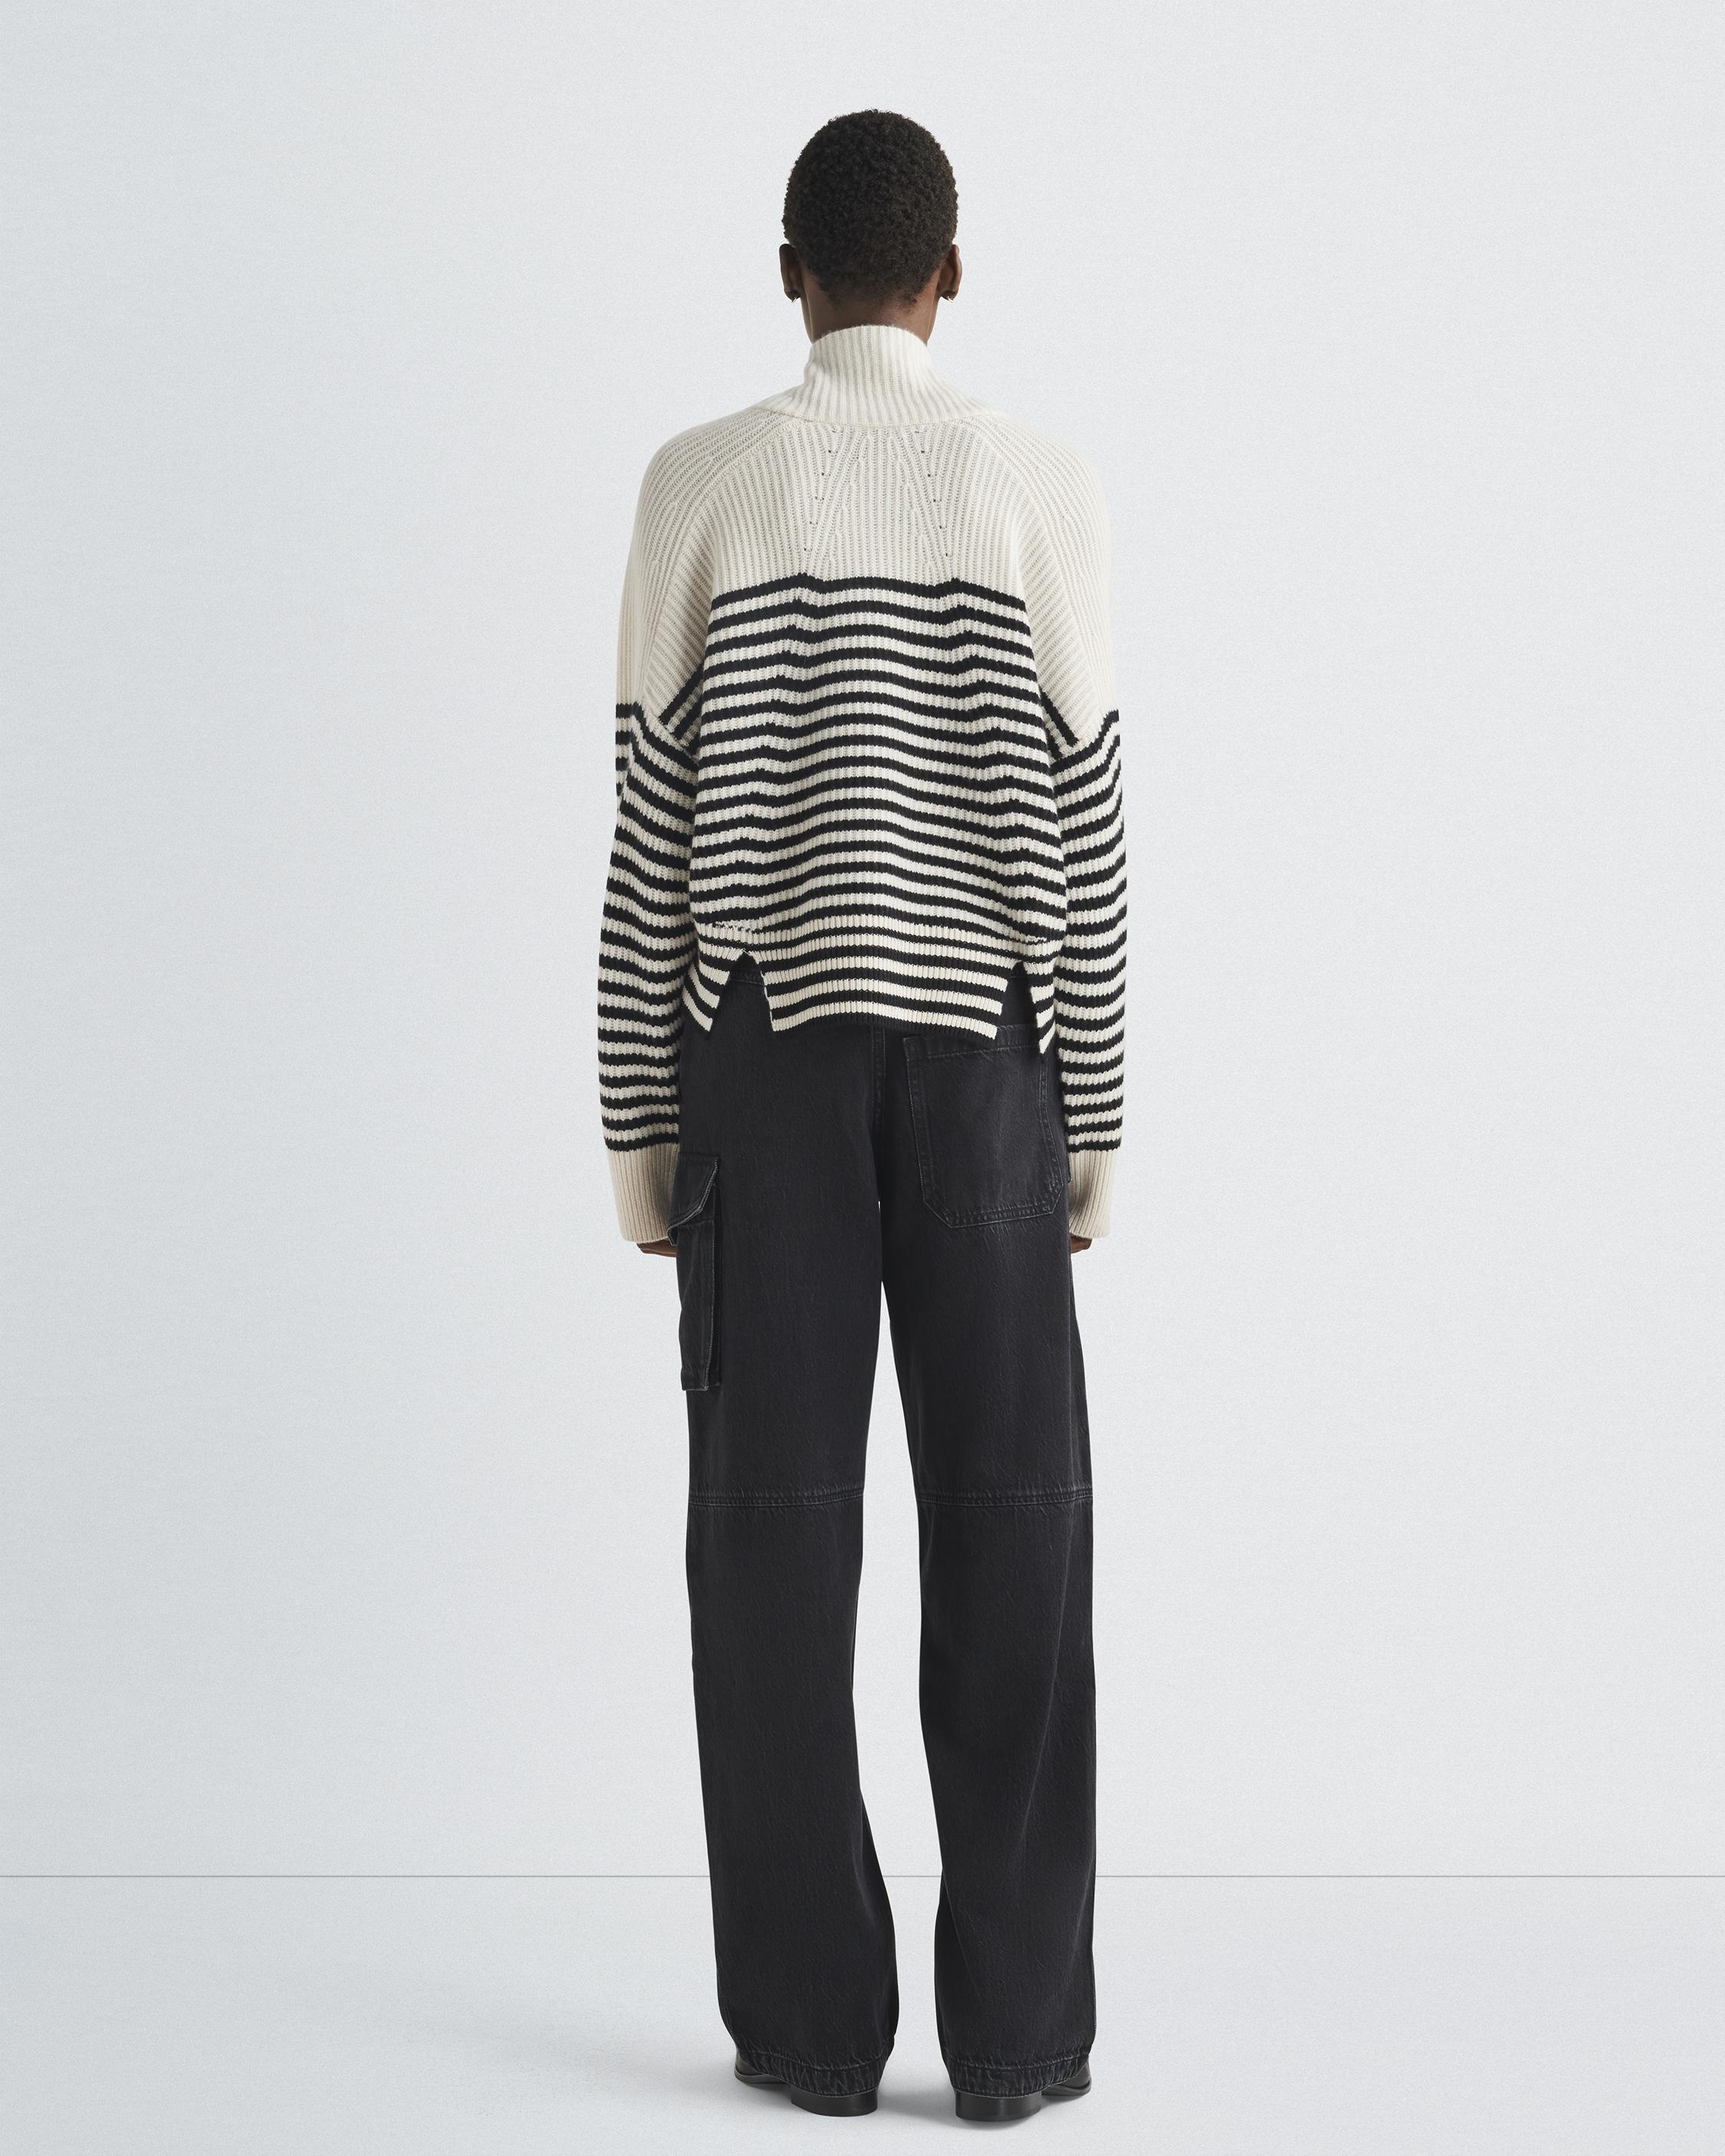 Pierce Striped Cashmere Half-Zip
Relaxed Fit - 5